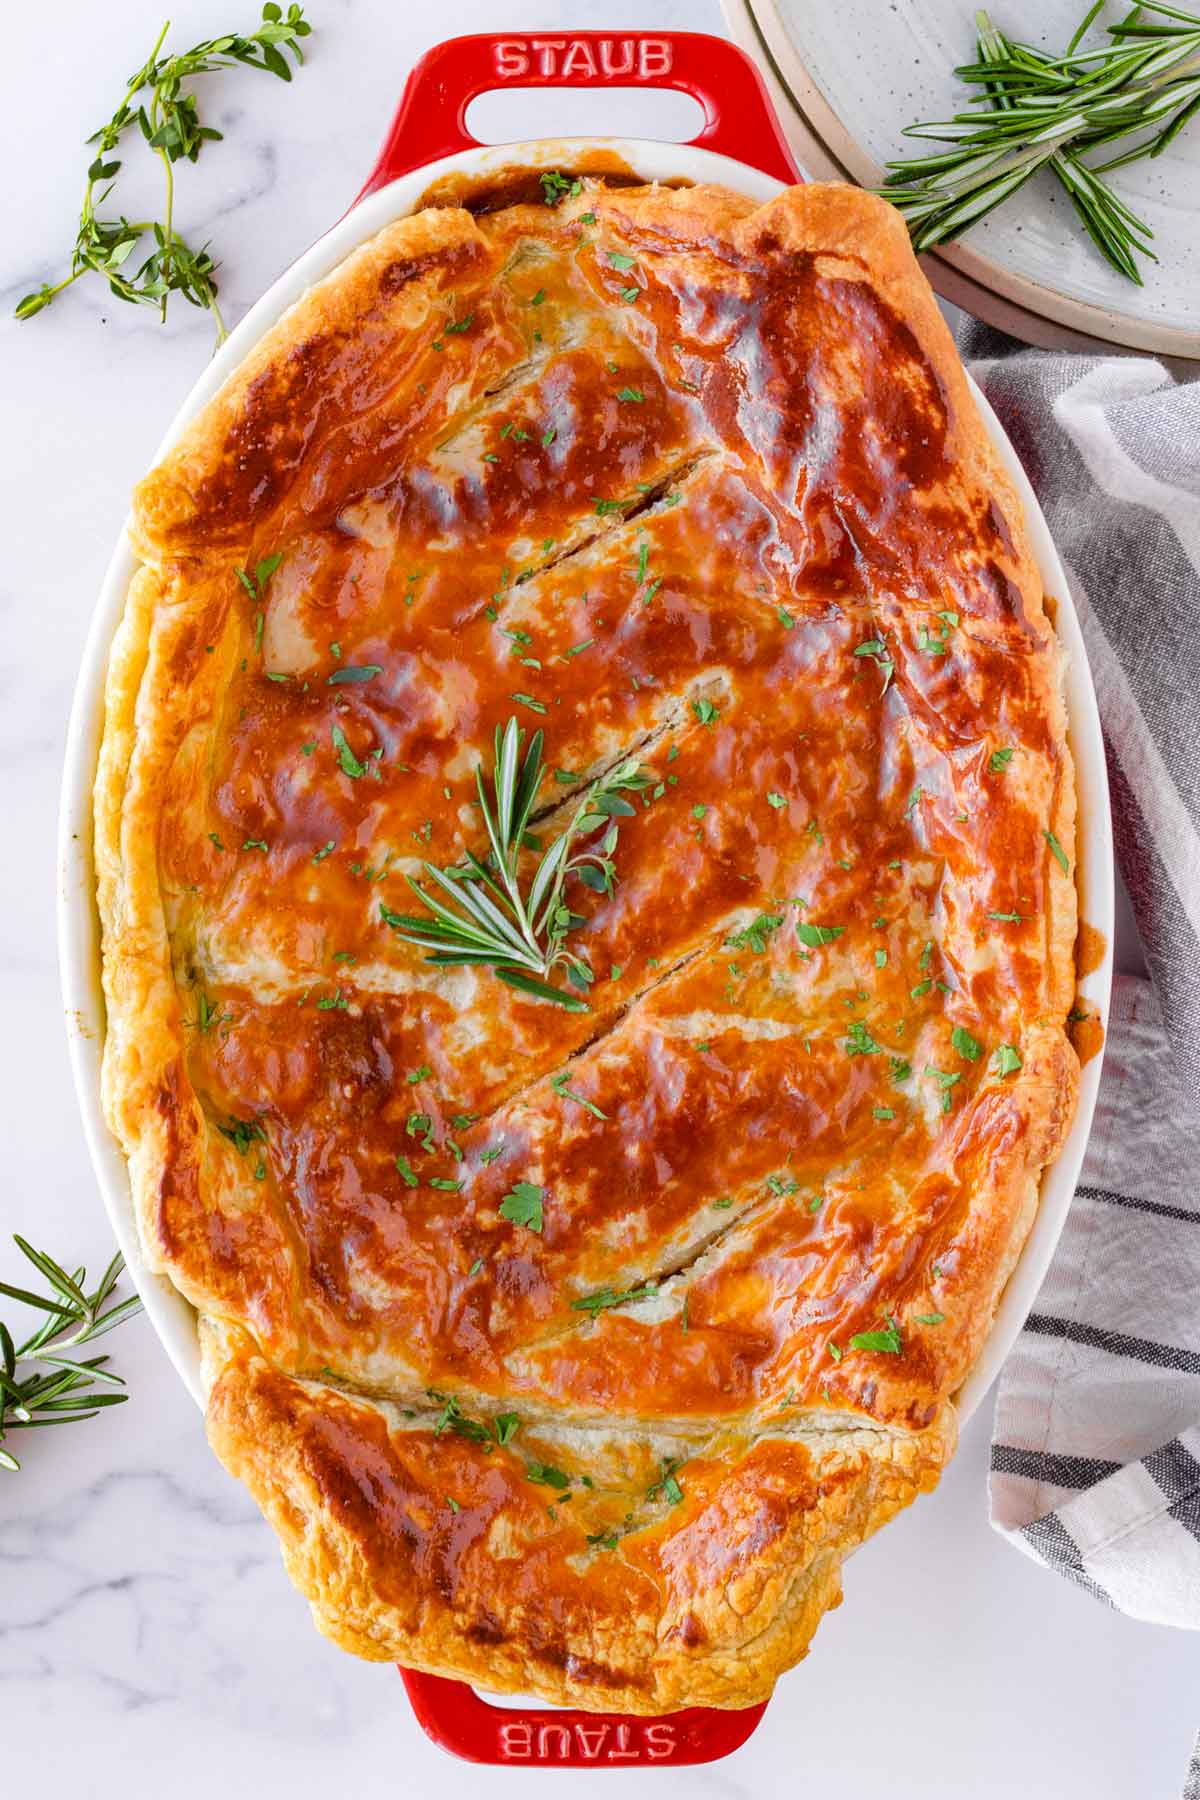 oval shaped baked pot pie with garnish